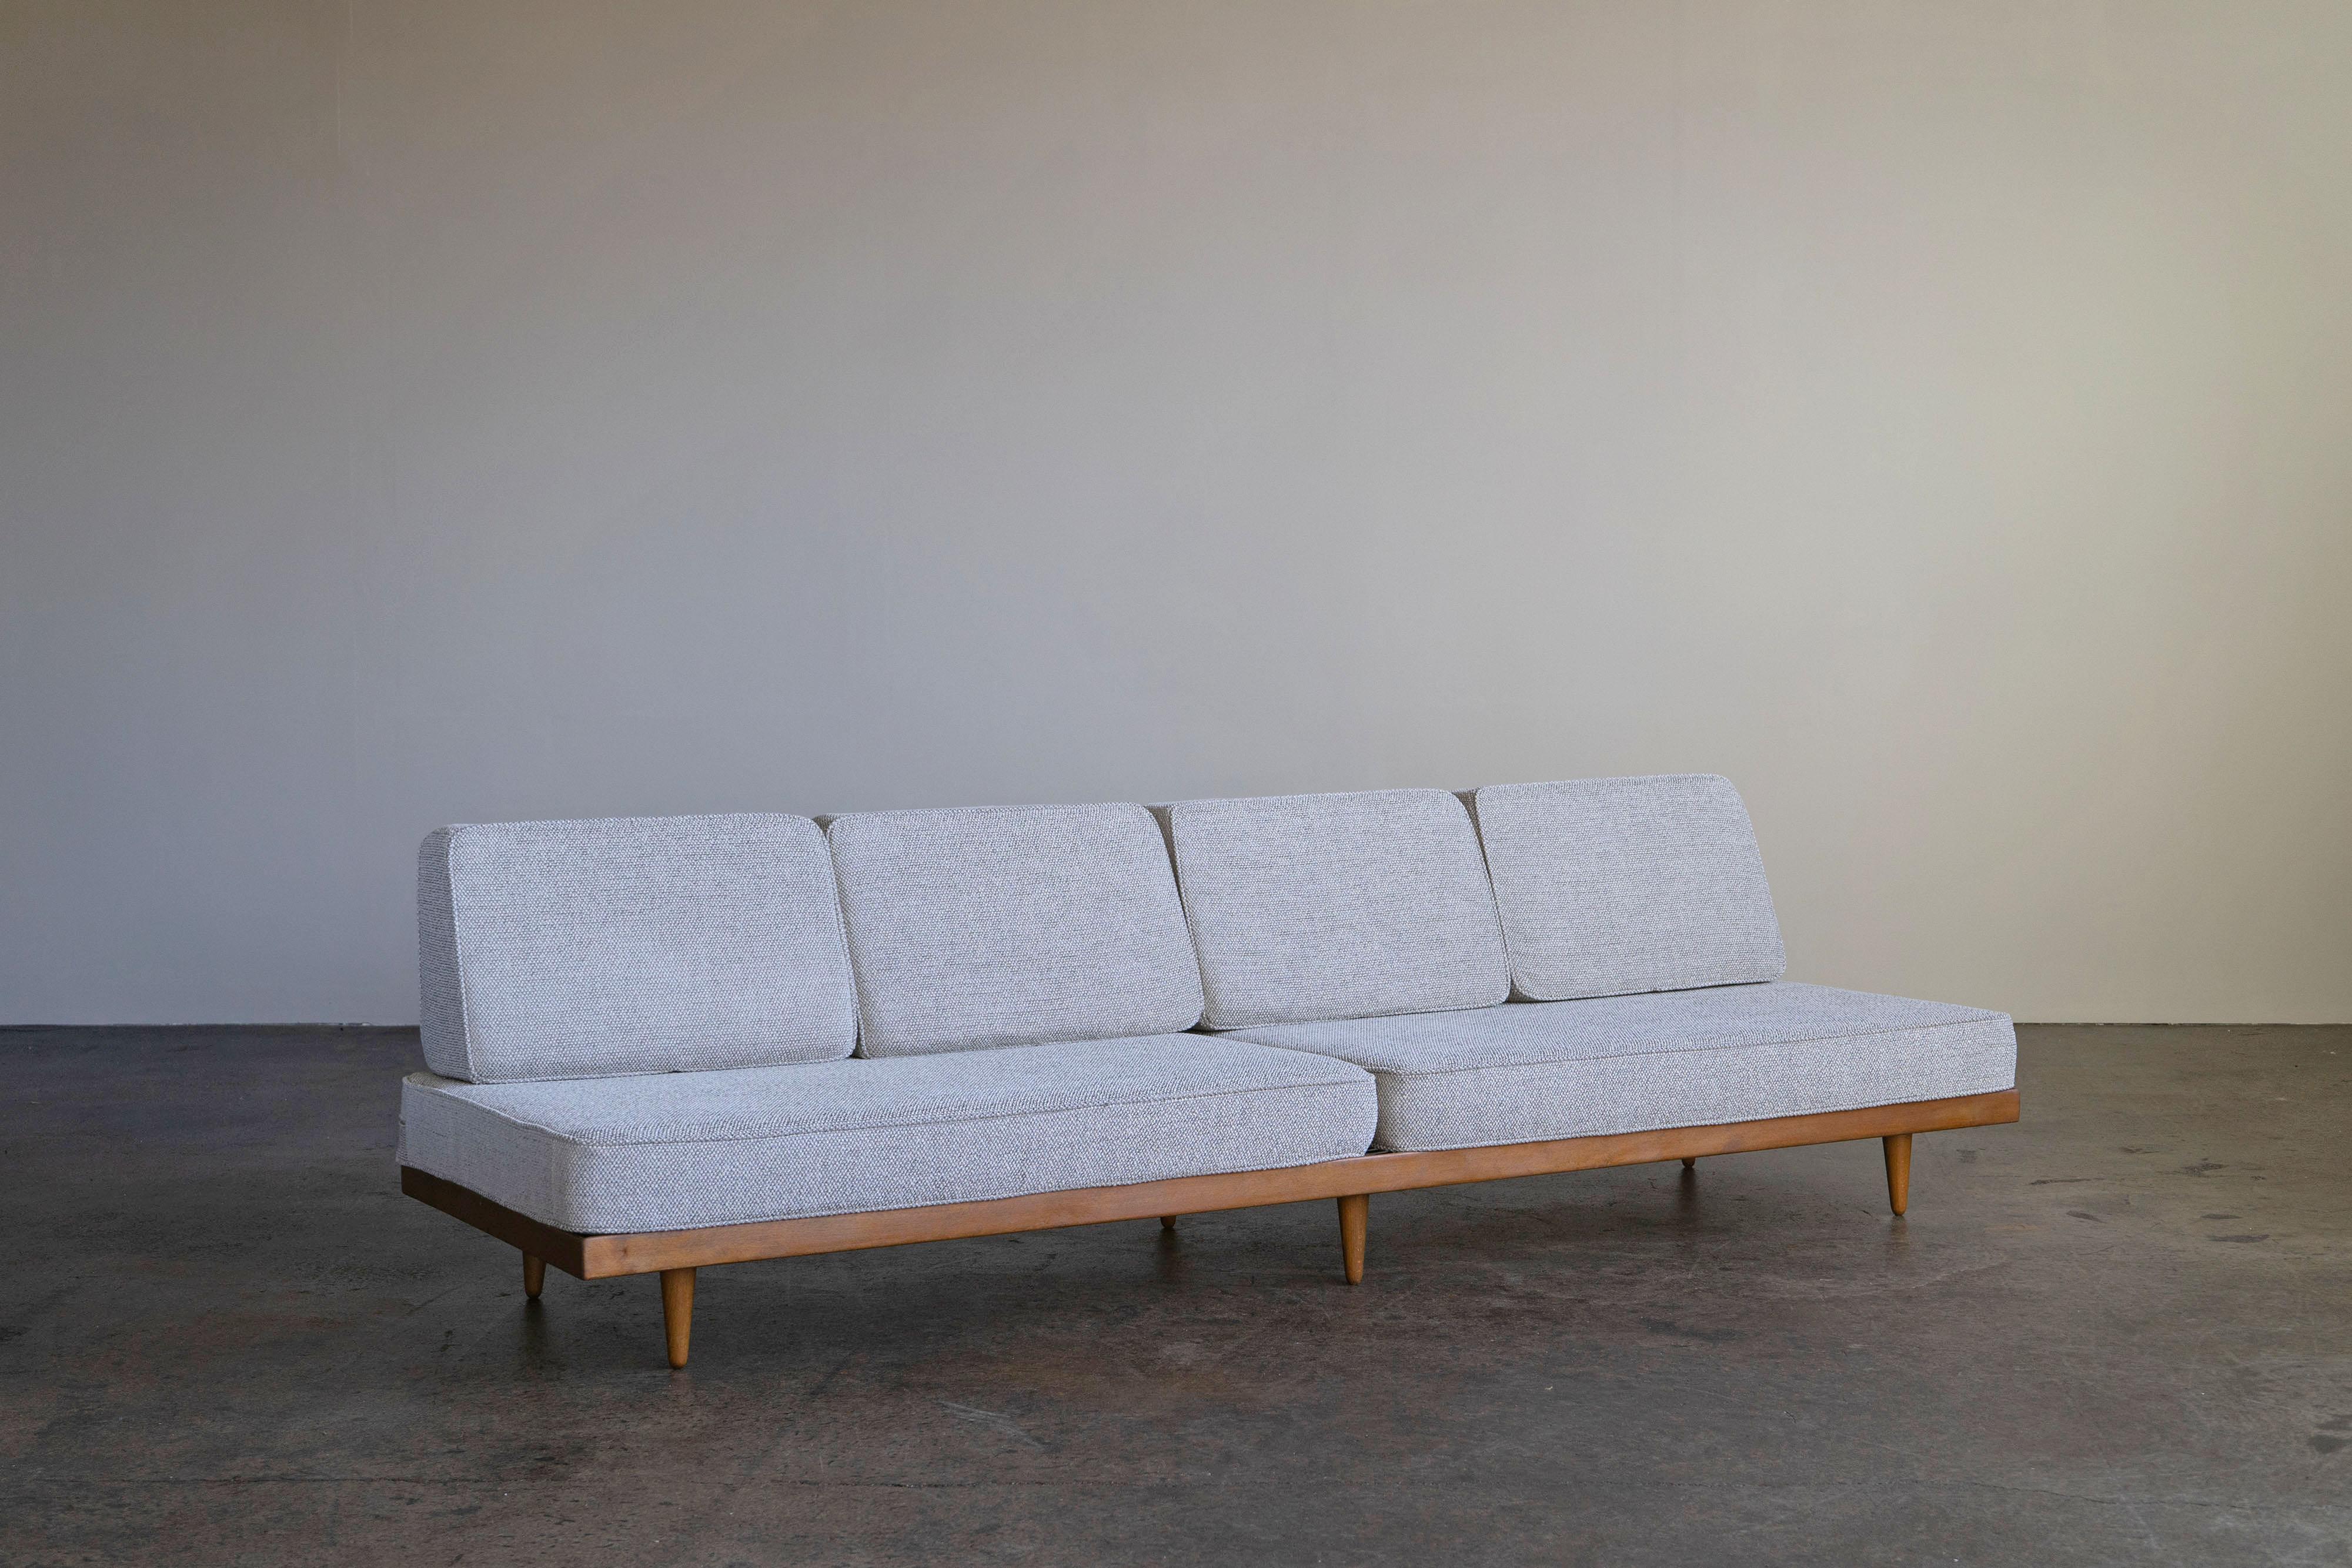 Large Mid-Century Modern Daybed from the 1950s with Bouclé Fabric 2